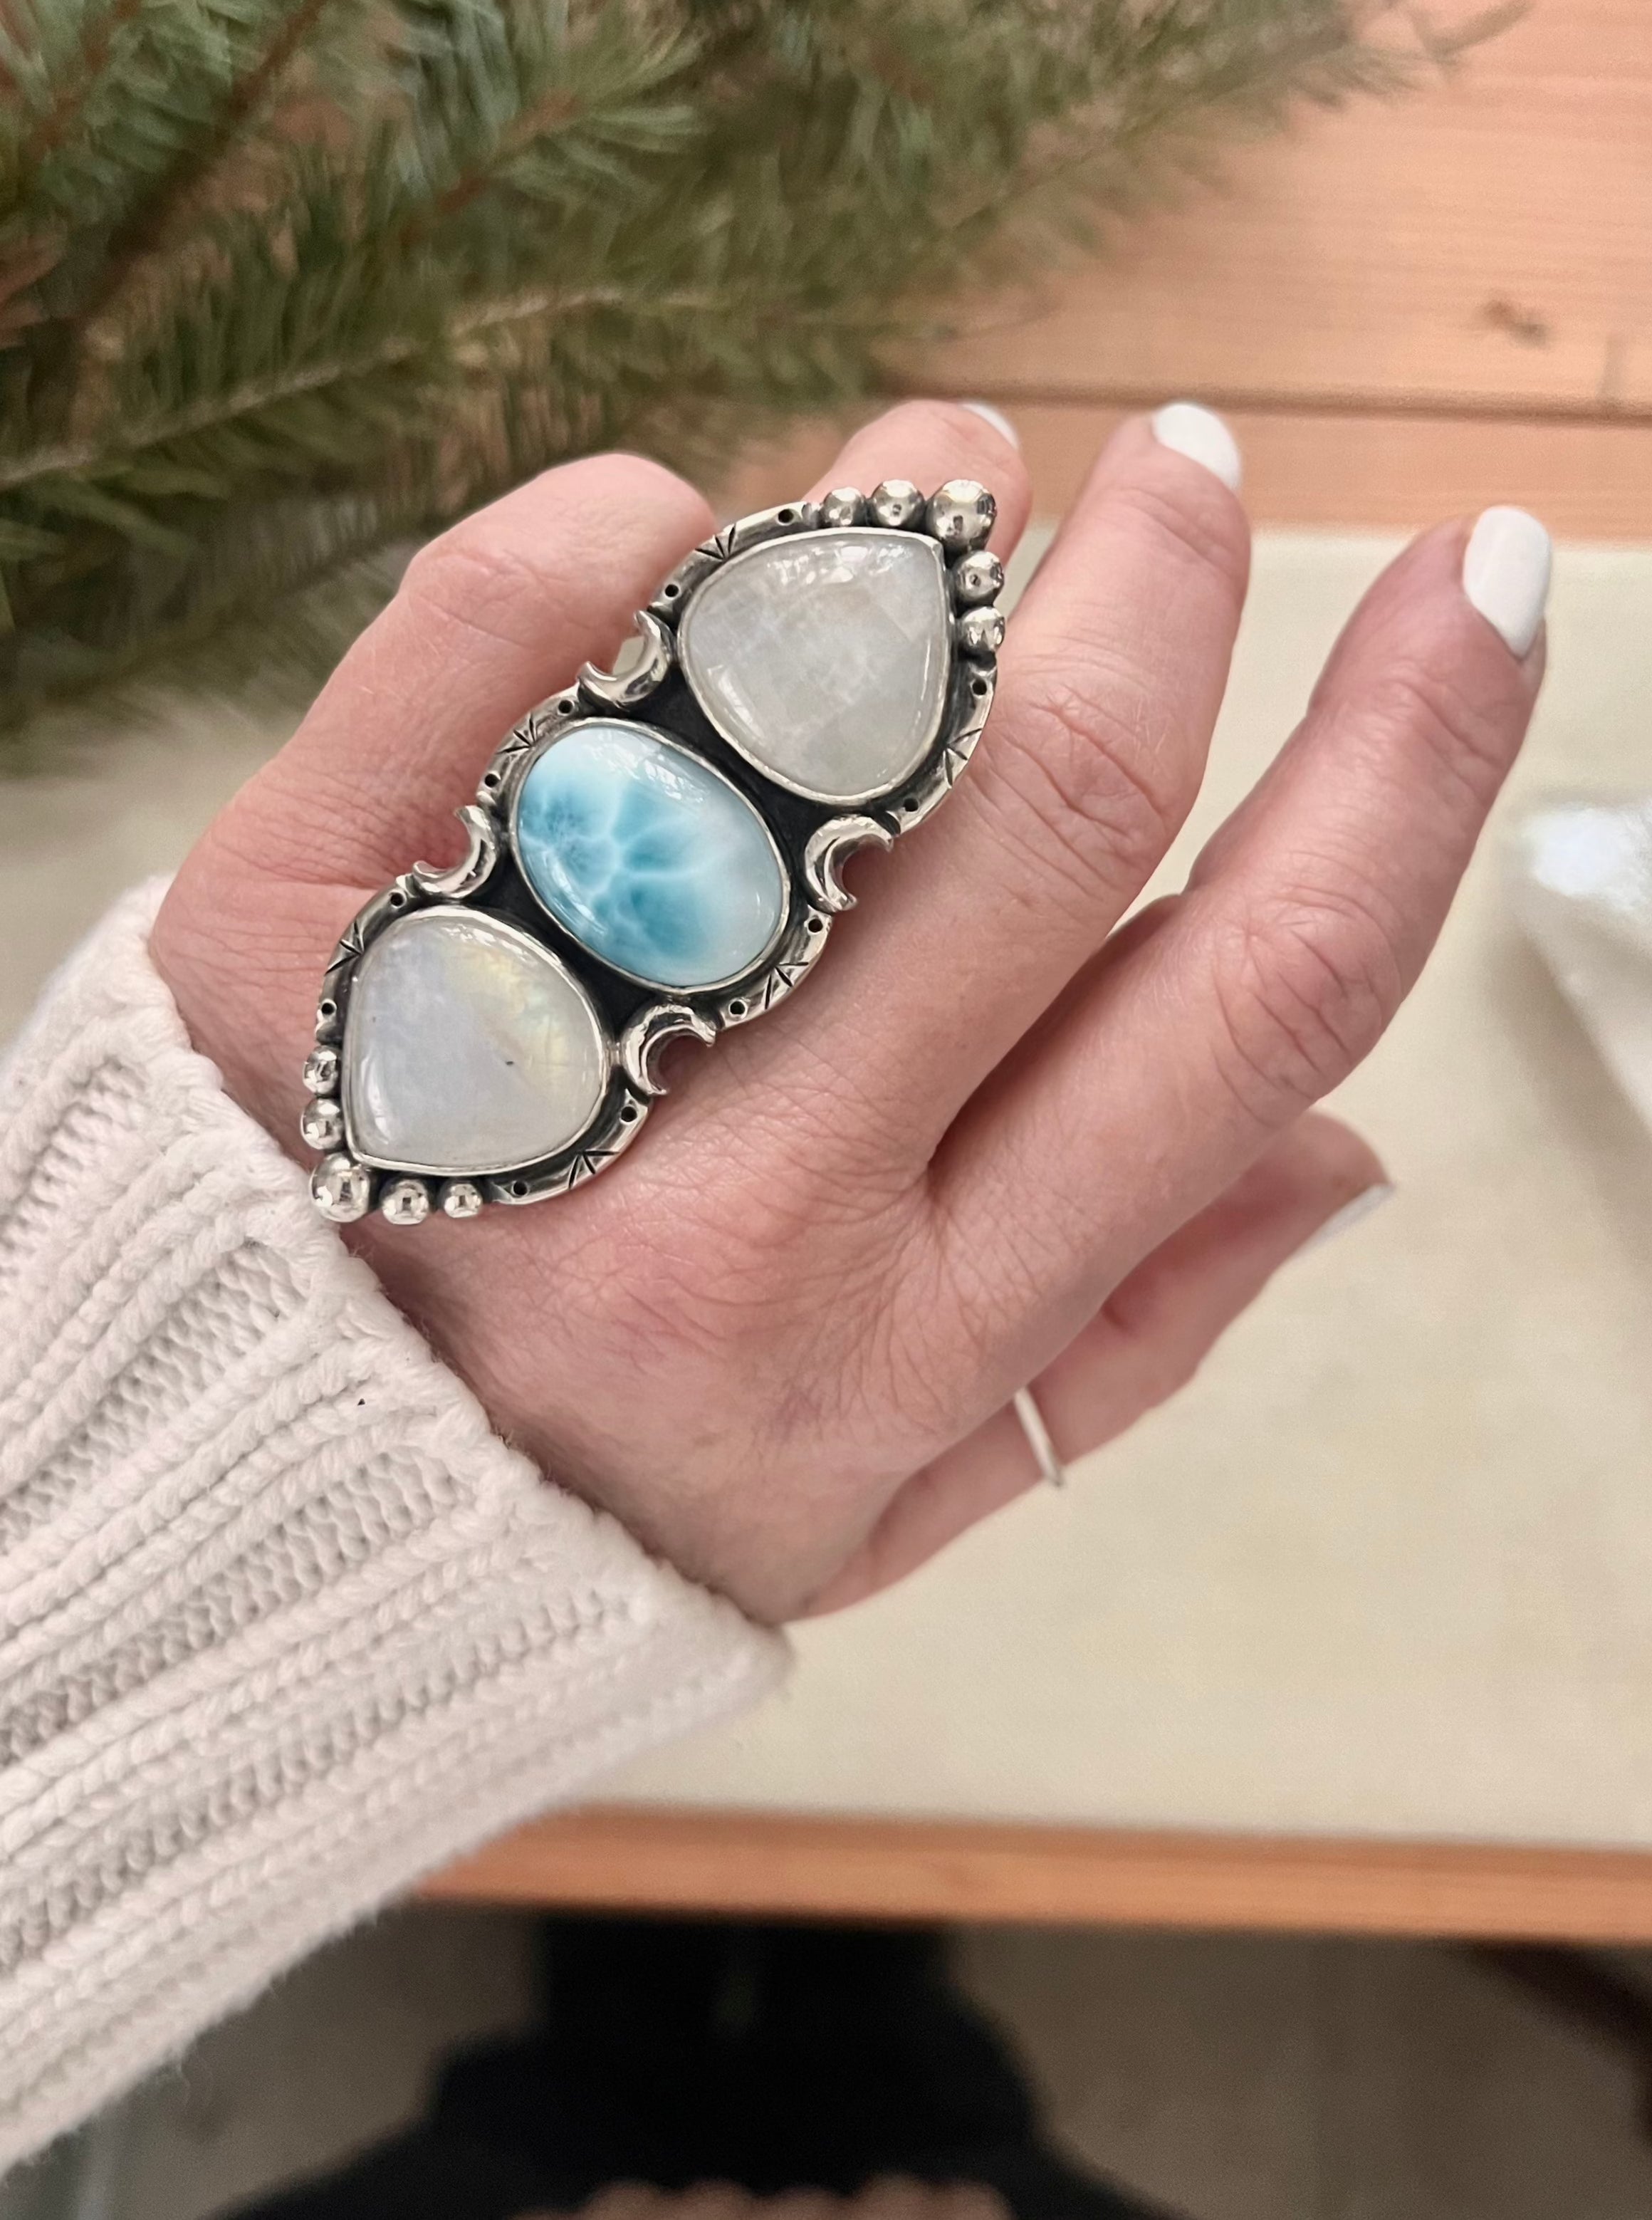 XL Rainbow Moonstone Ring, 7-9 Adjustable Band. Email me